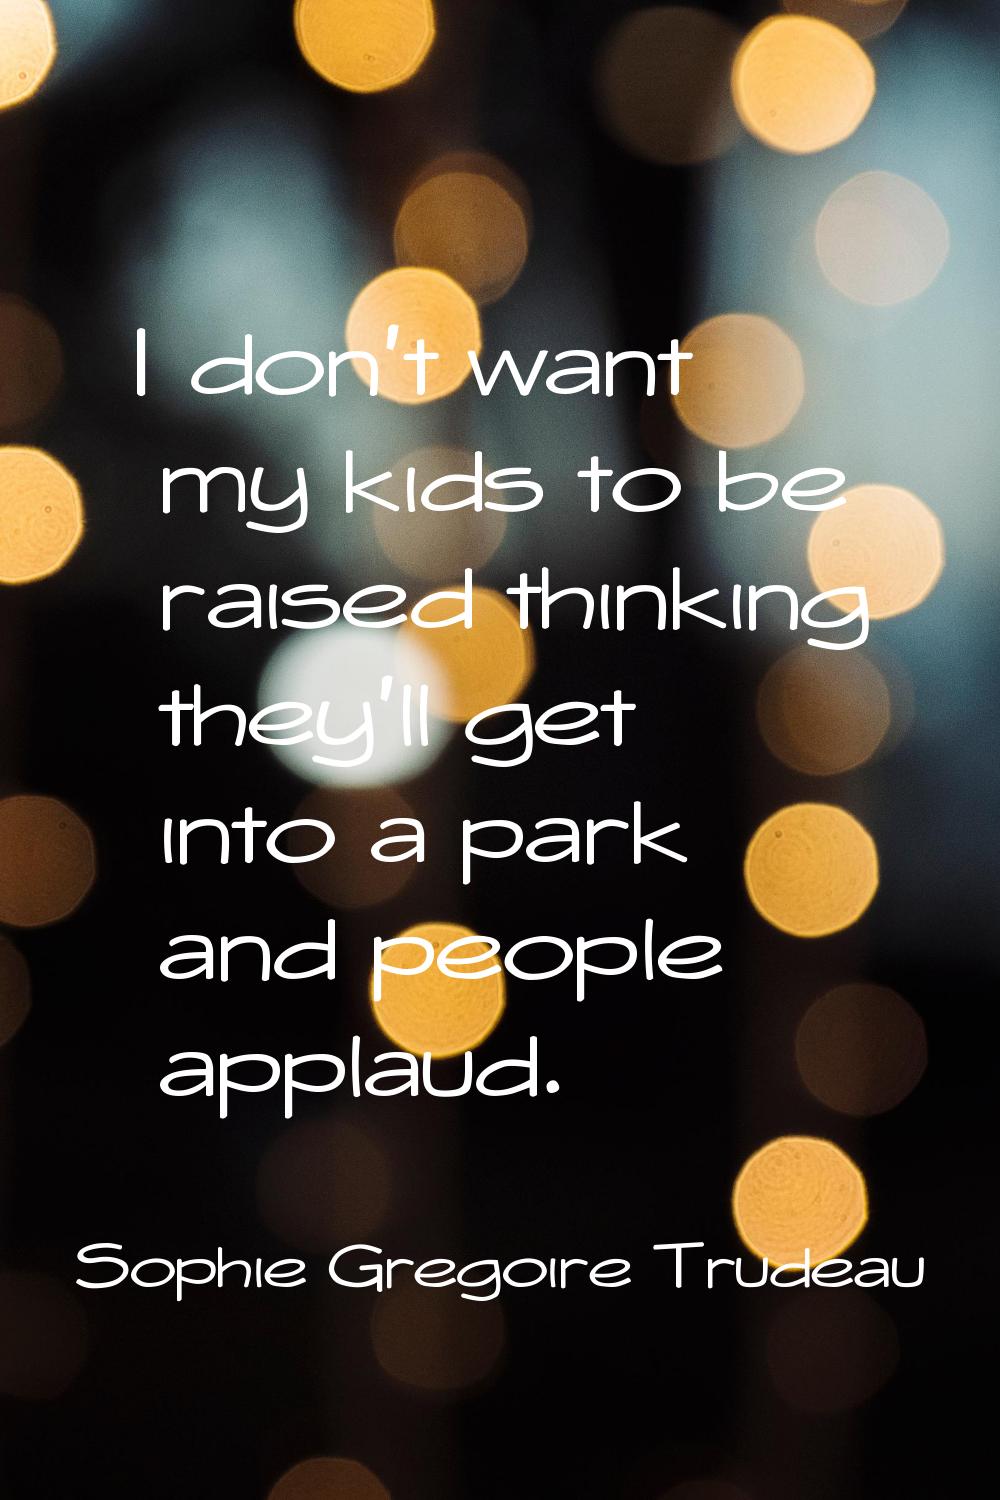 I don't want my kids to be raised thinking they'll get into a park and people applaud.